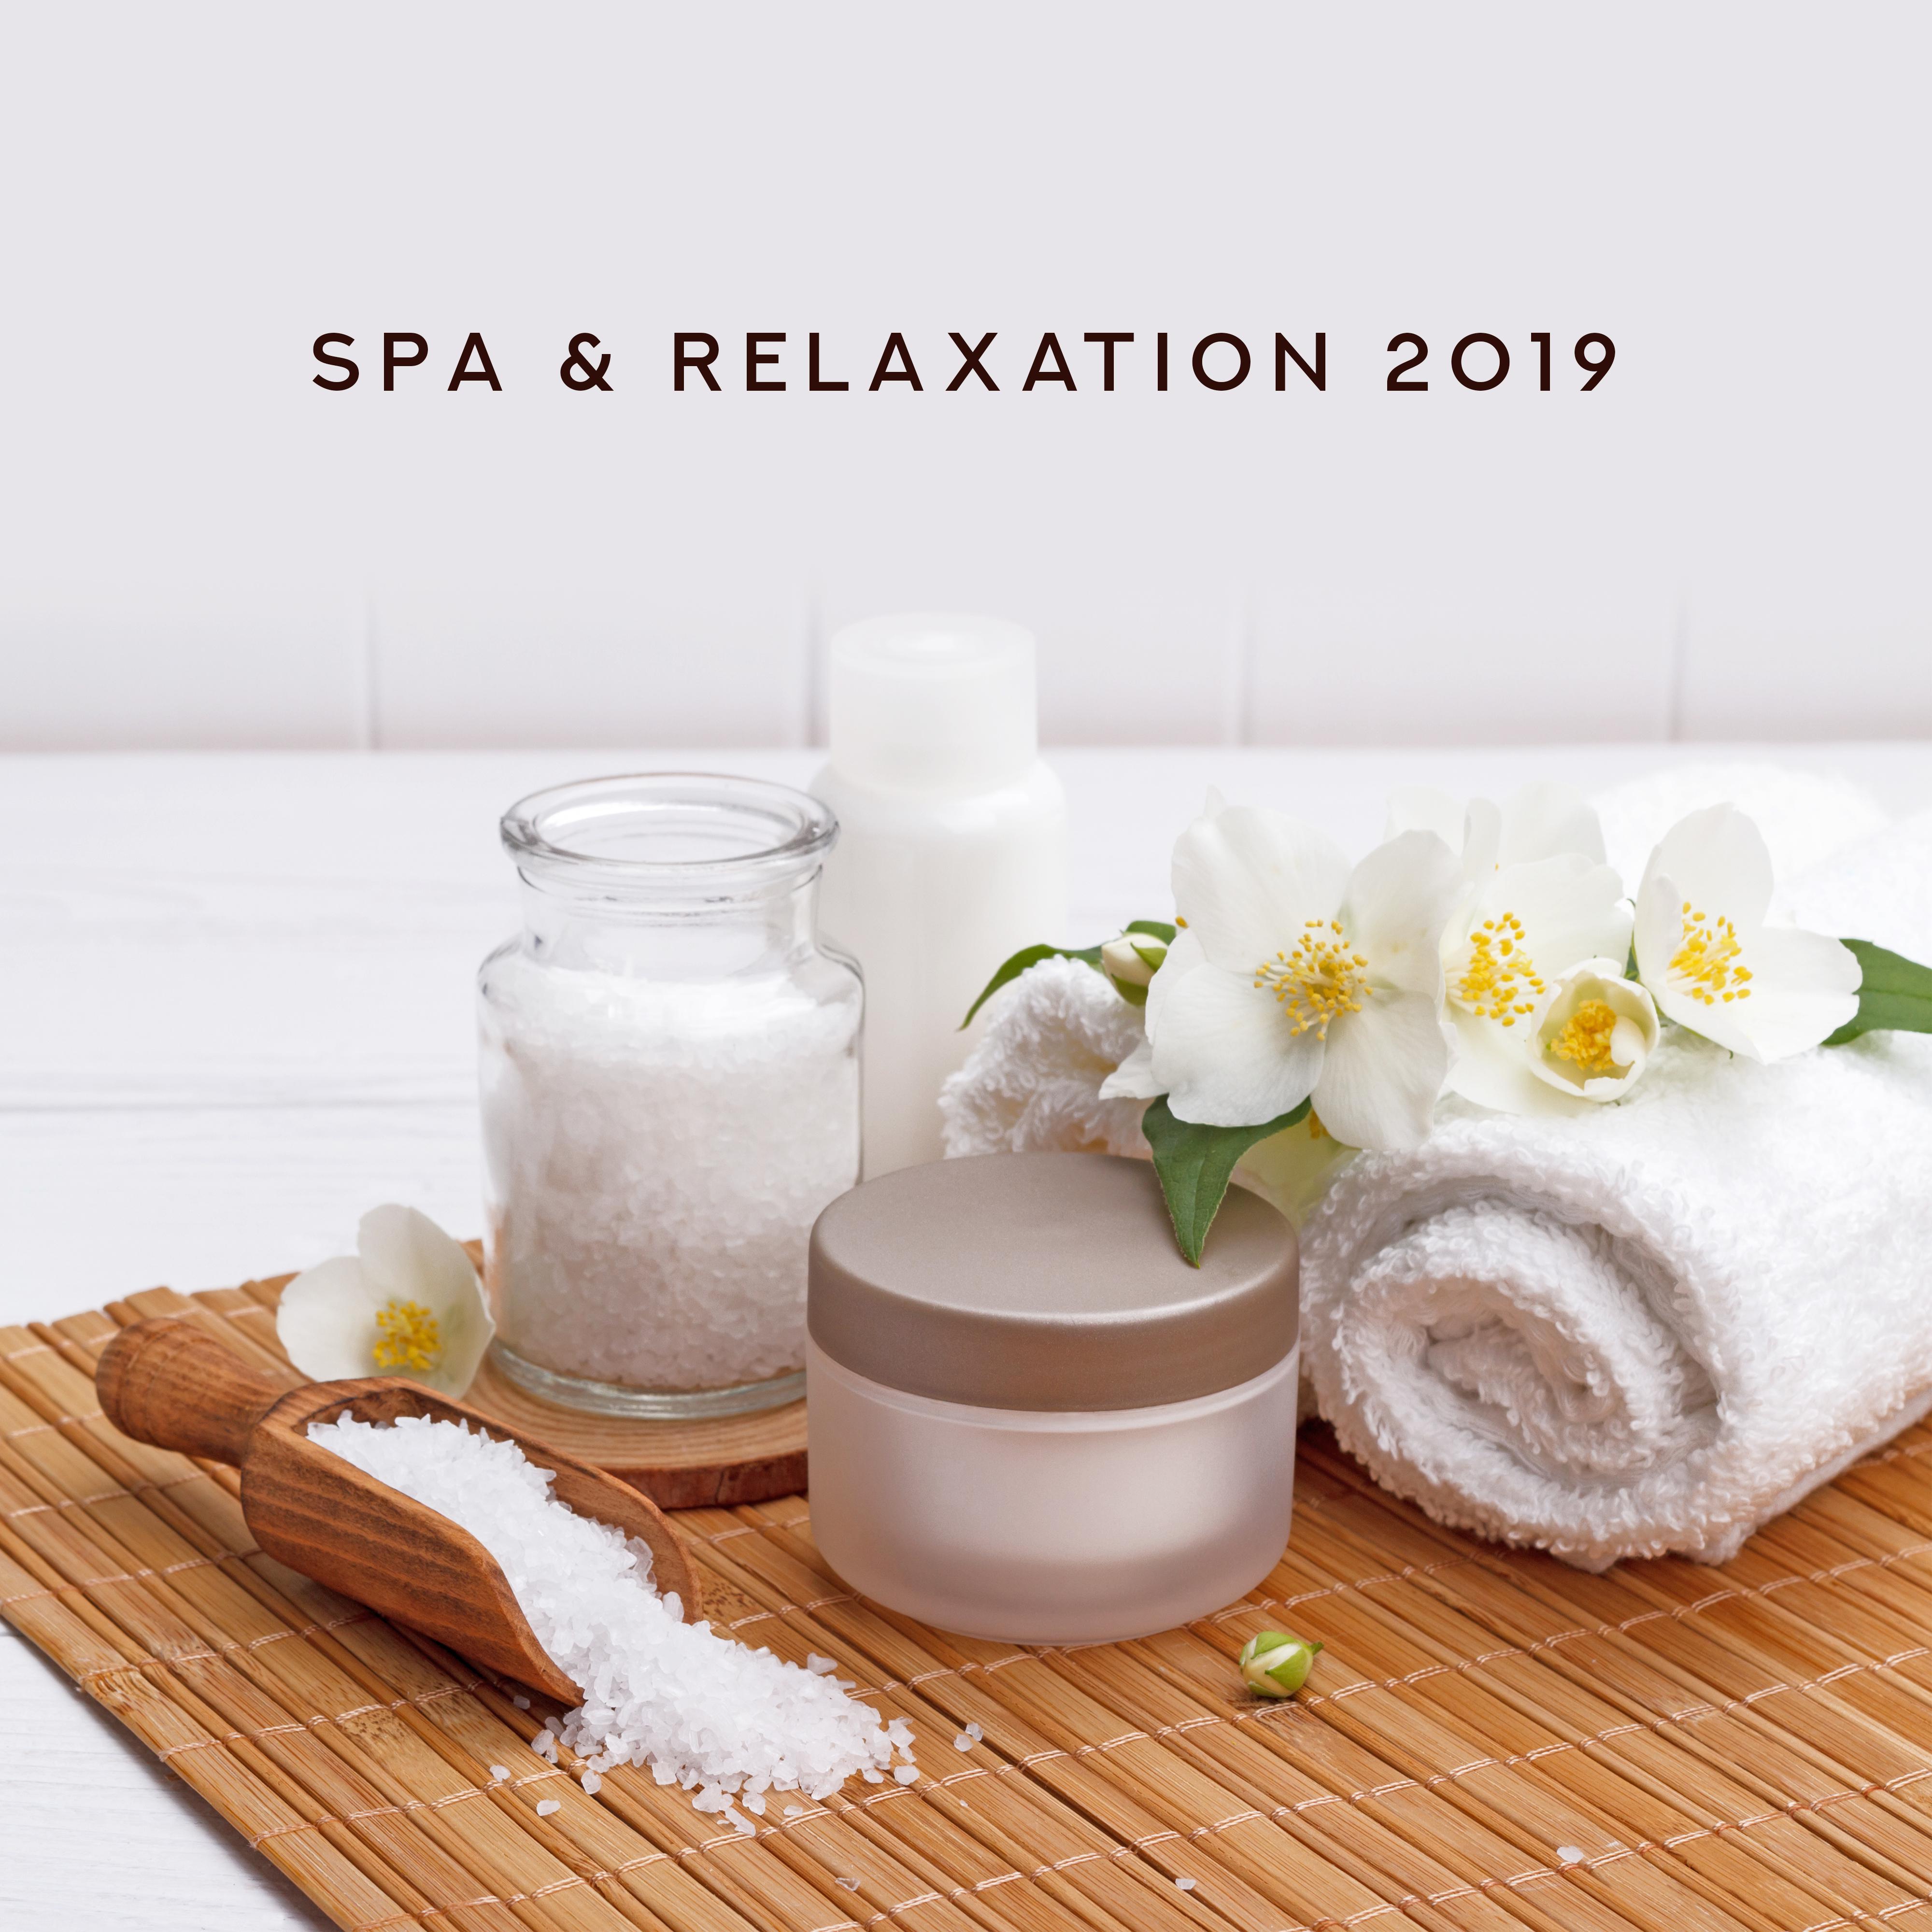 Spa & Relaxation 2019